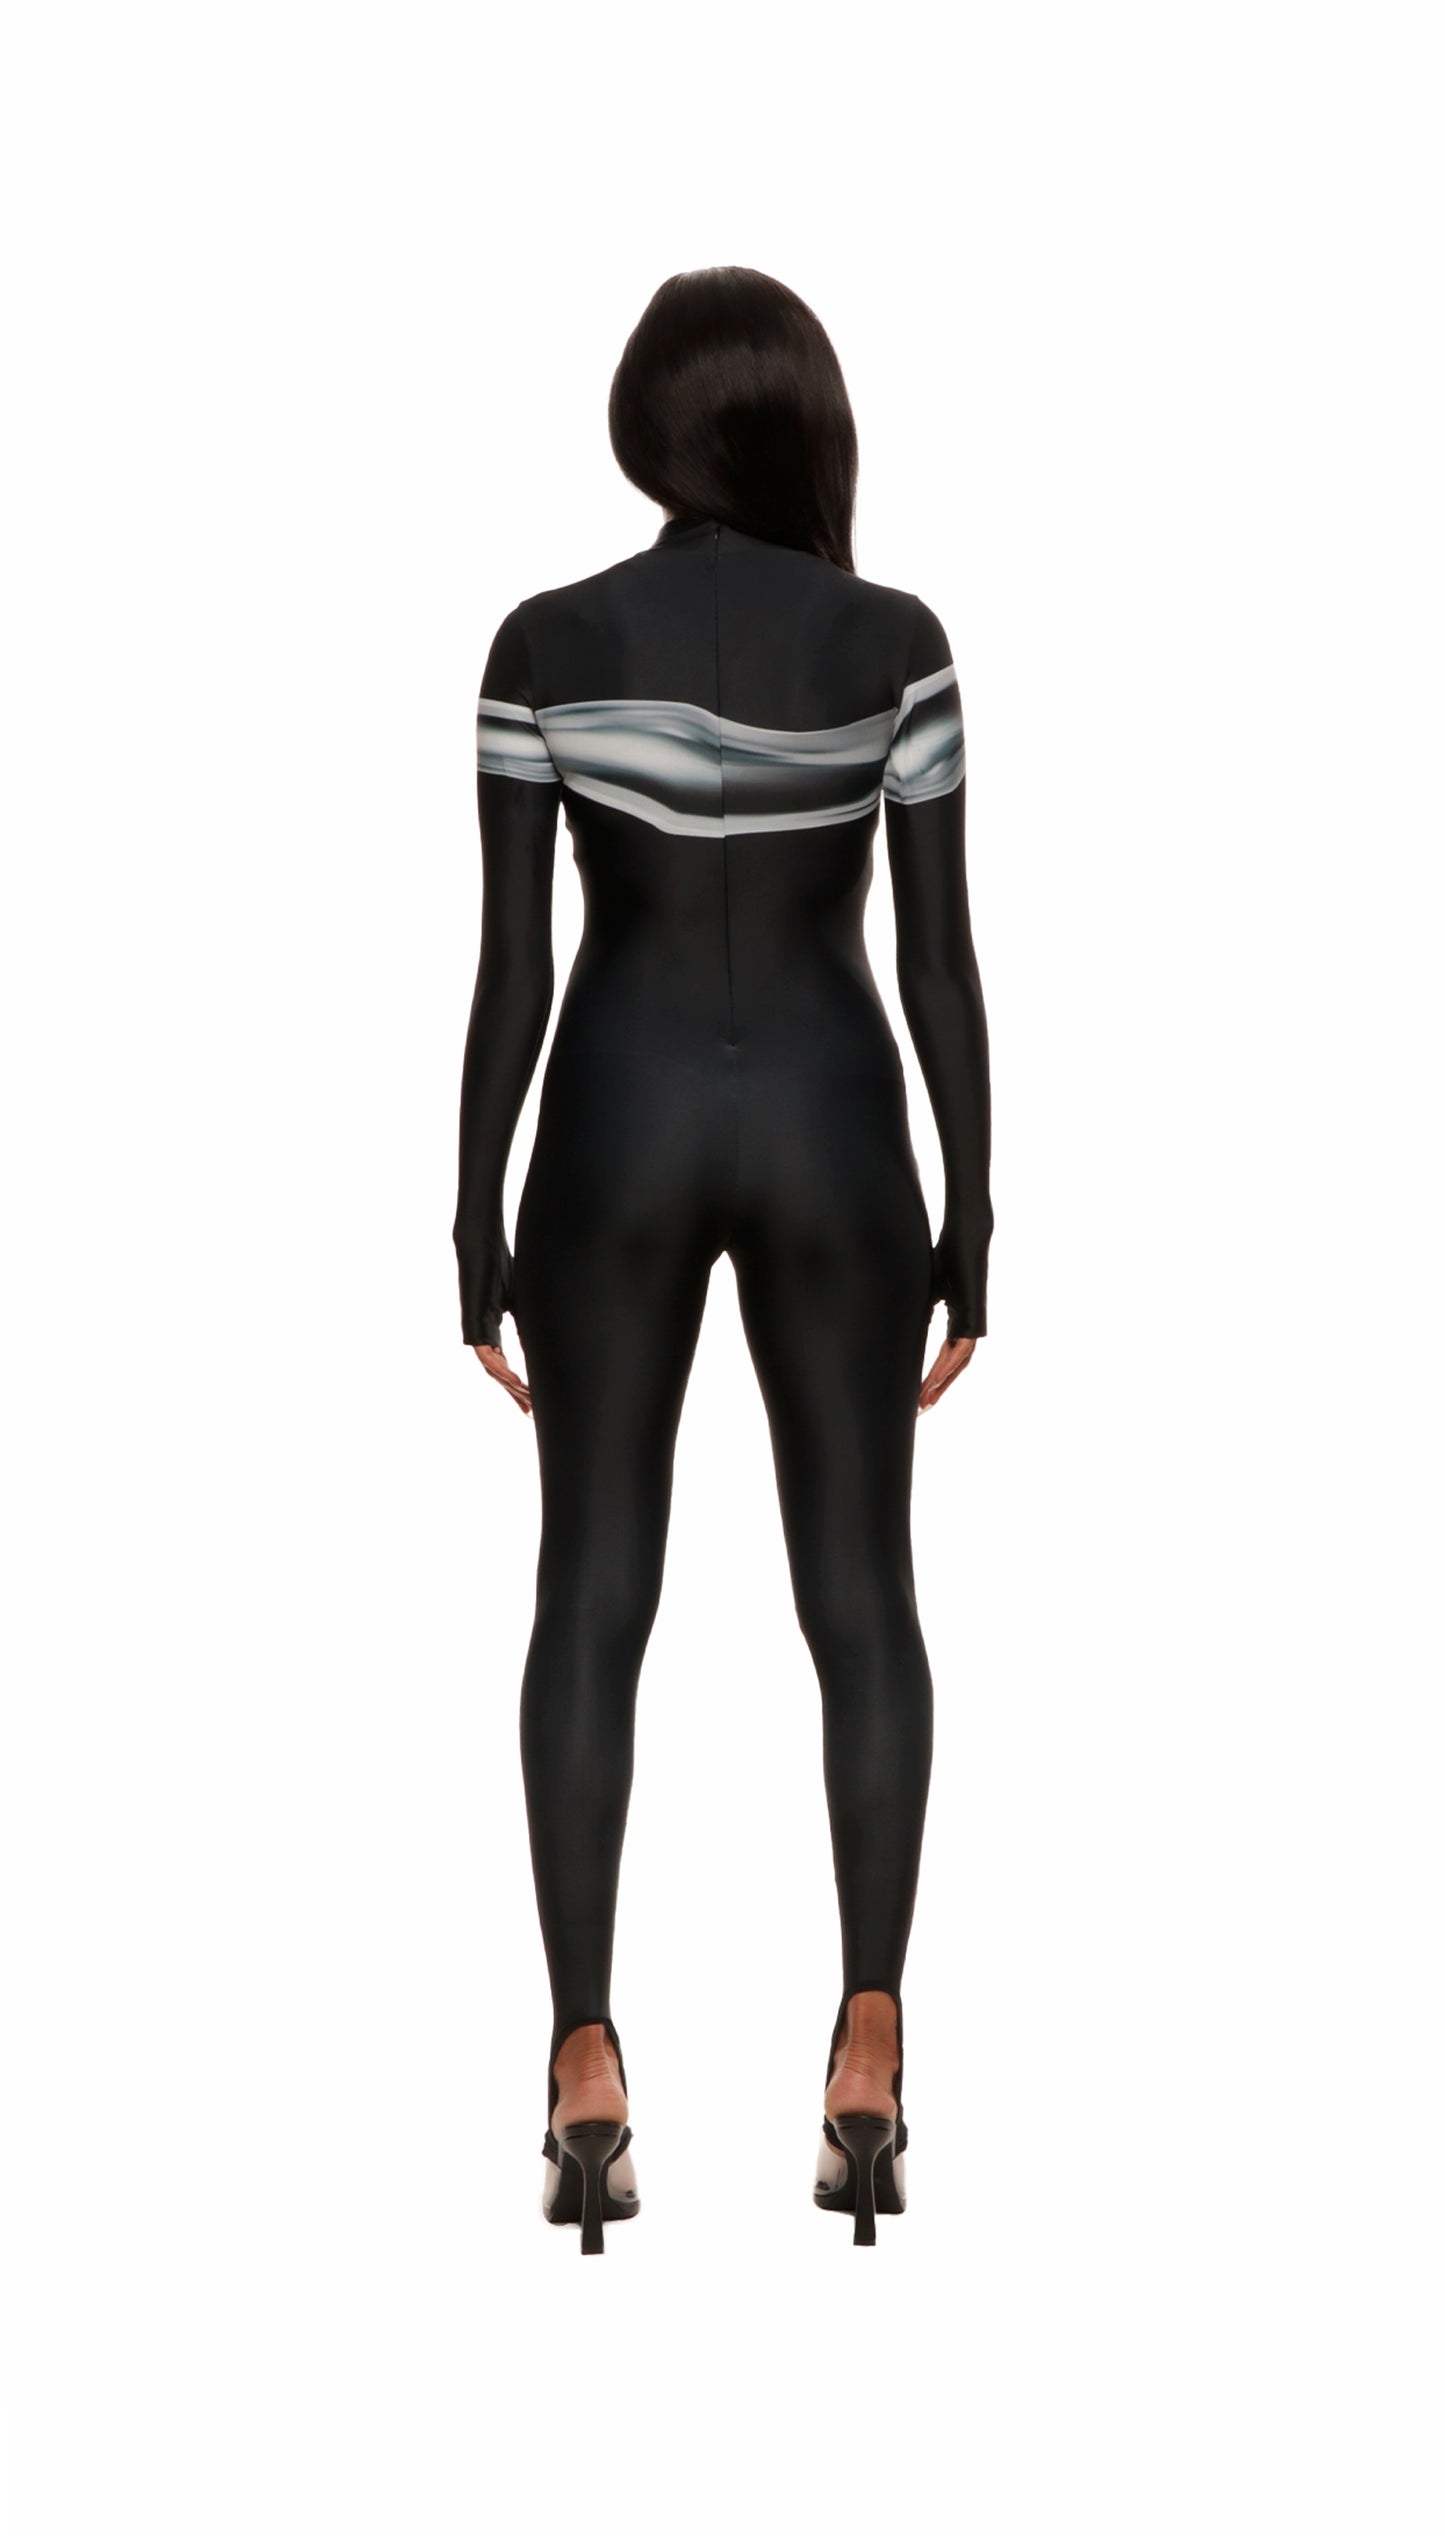 Woman wears black printed wetsuit or catsuit with chrome detail across chest and QR logo with heel cutout and back zipper